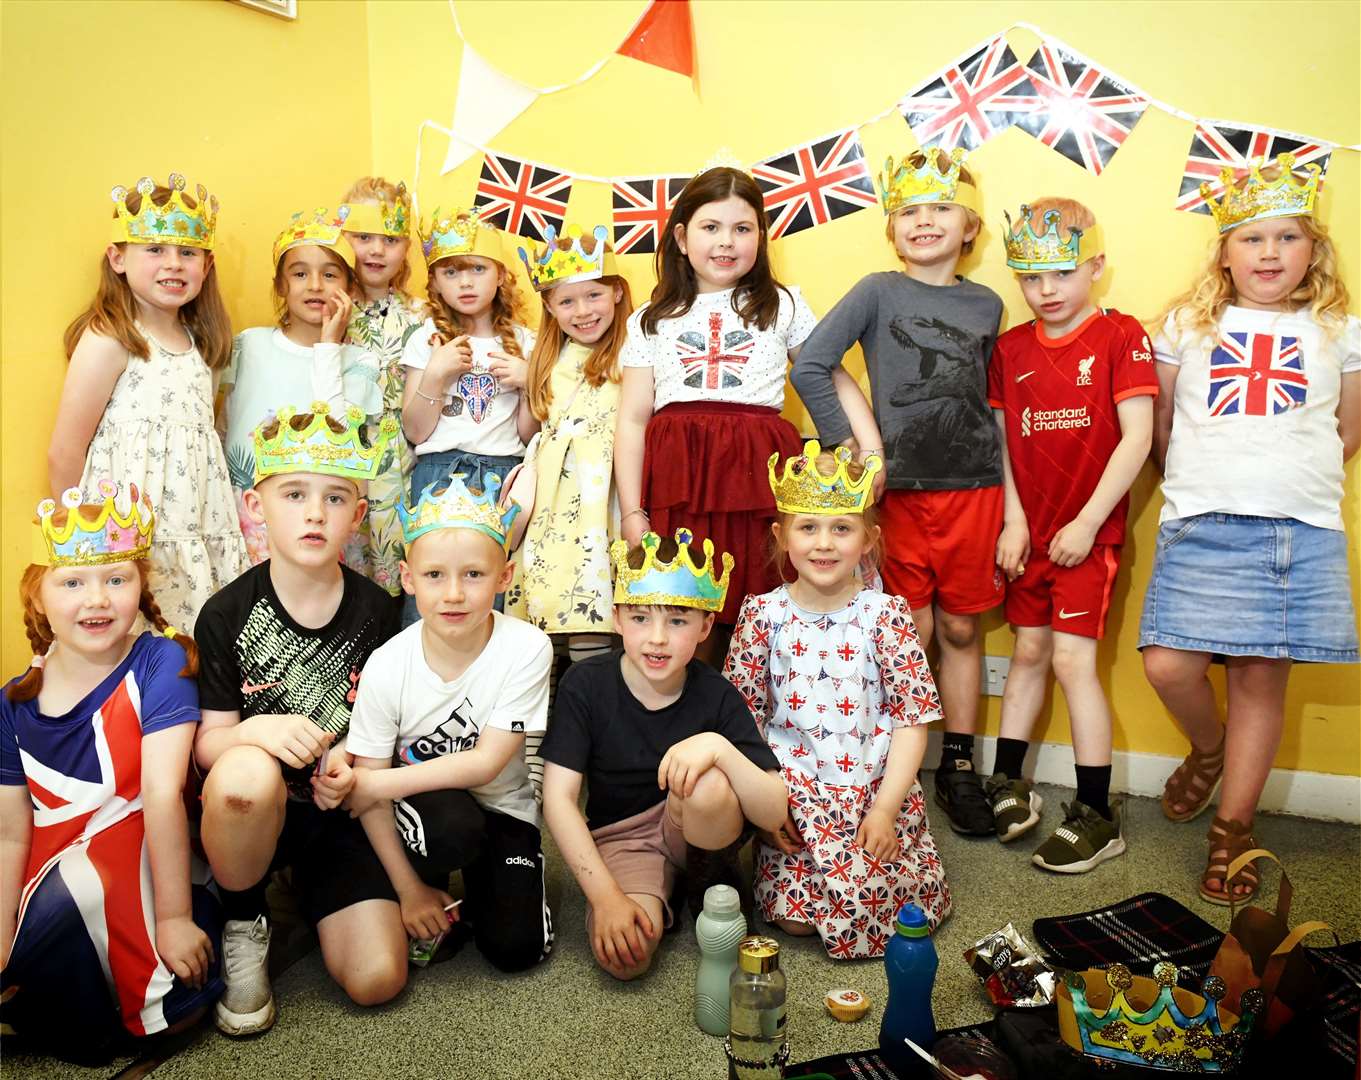 Dressed for the party is the Primary 2 class. Picture: James Mackenzie